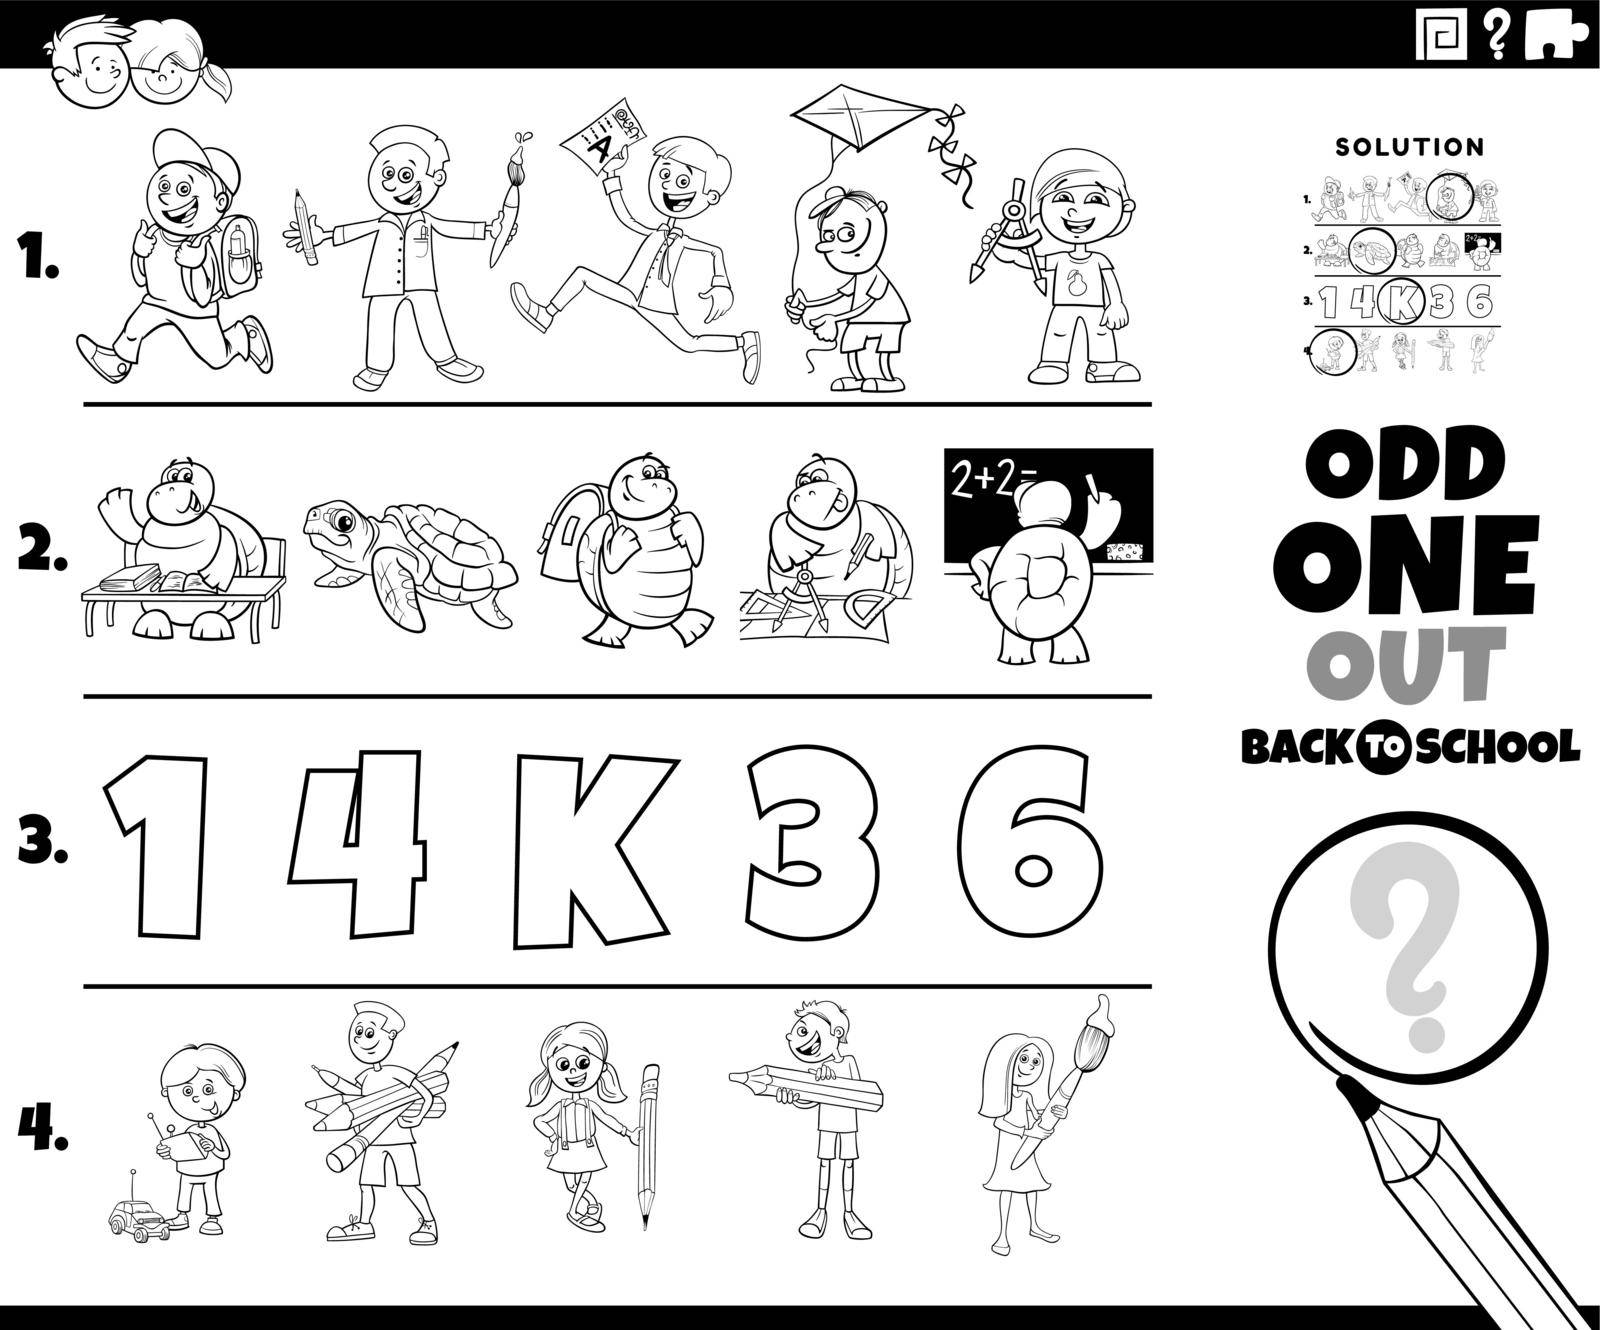 odd one out task with cartoon characters coloring book page by izakowski